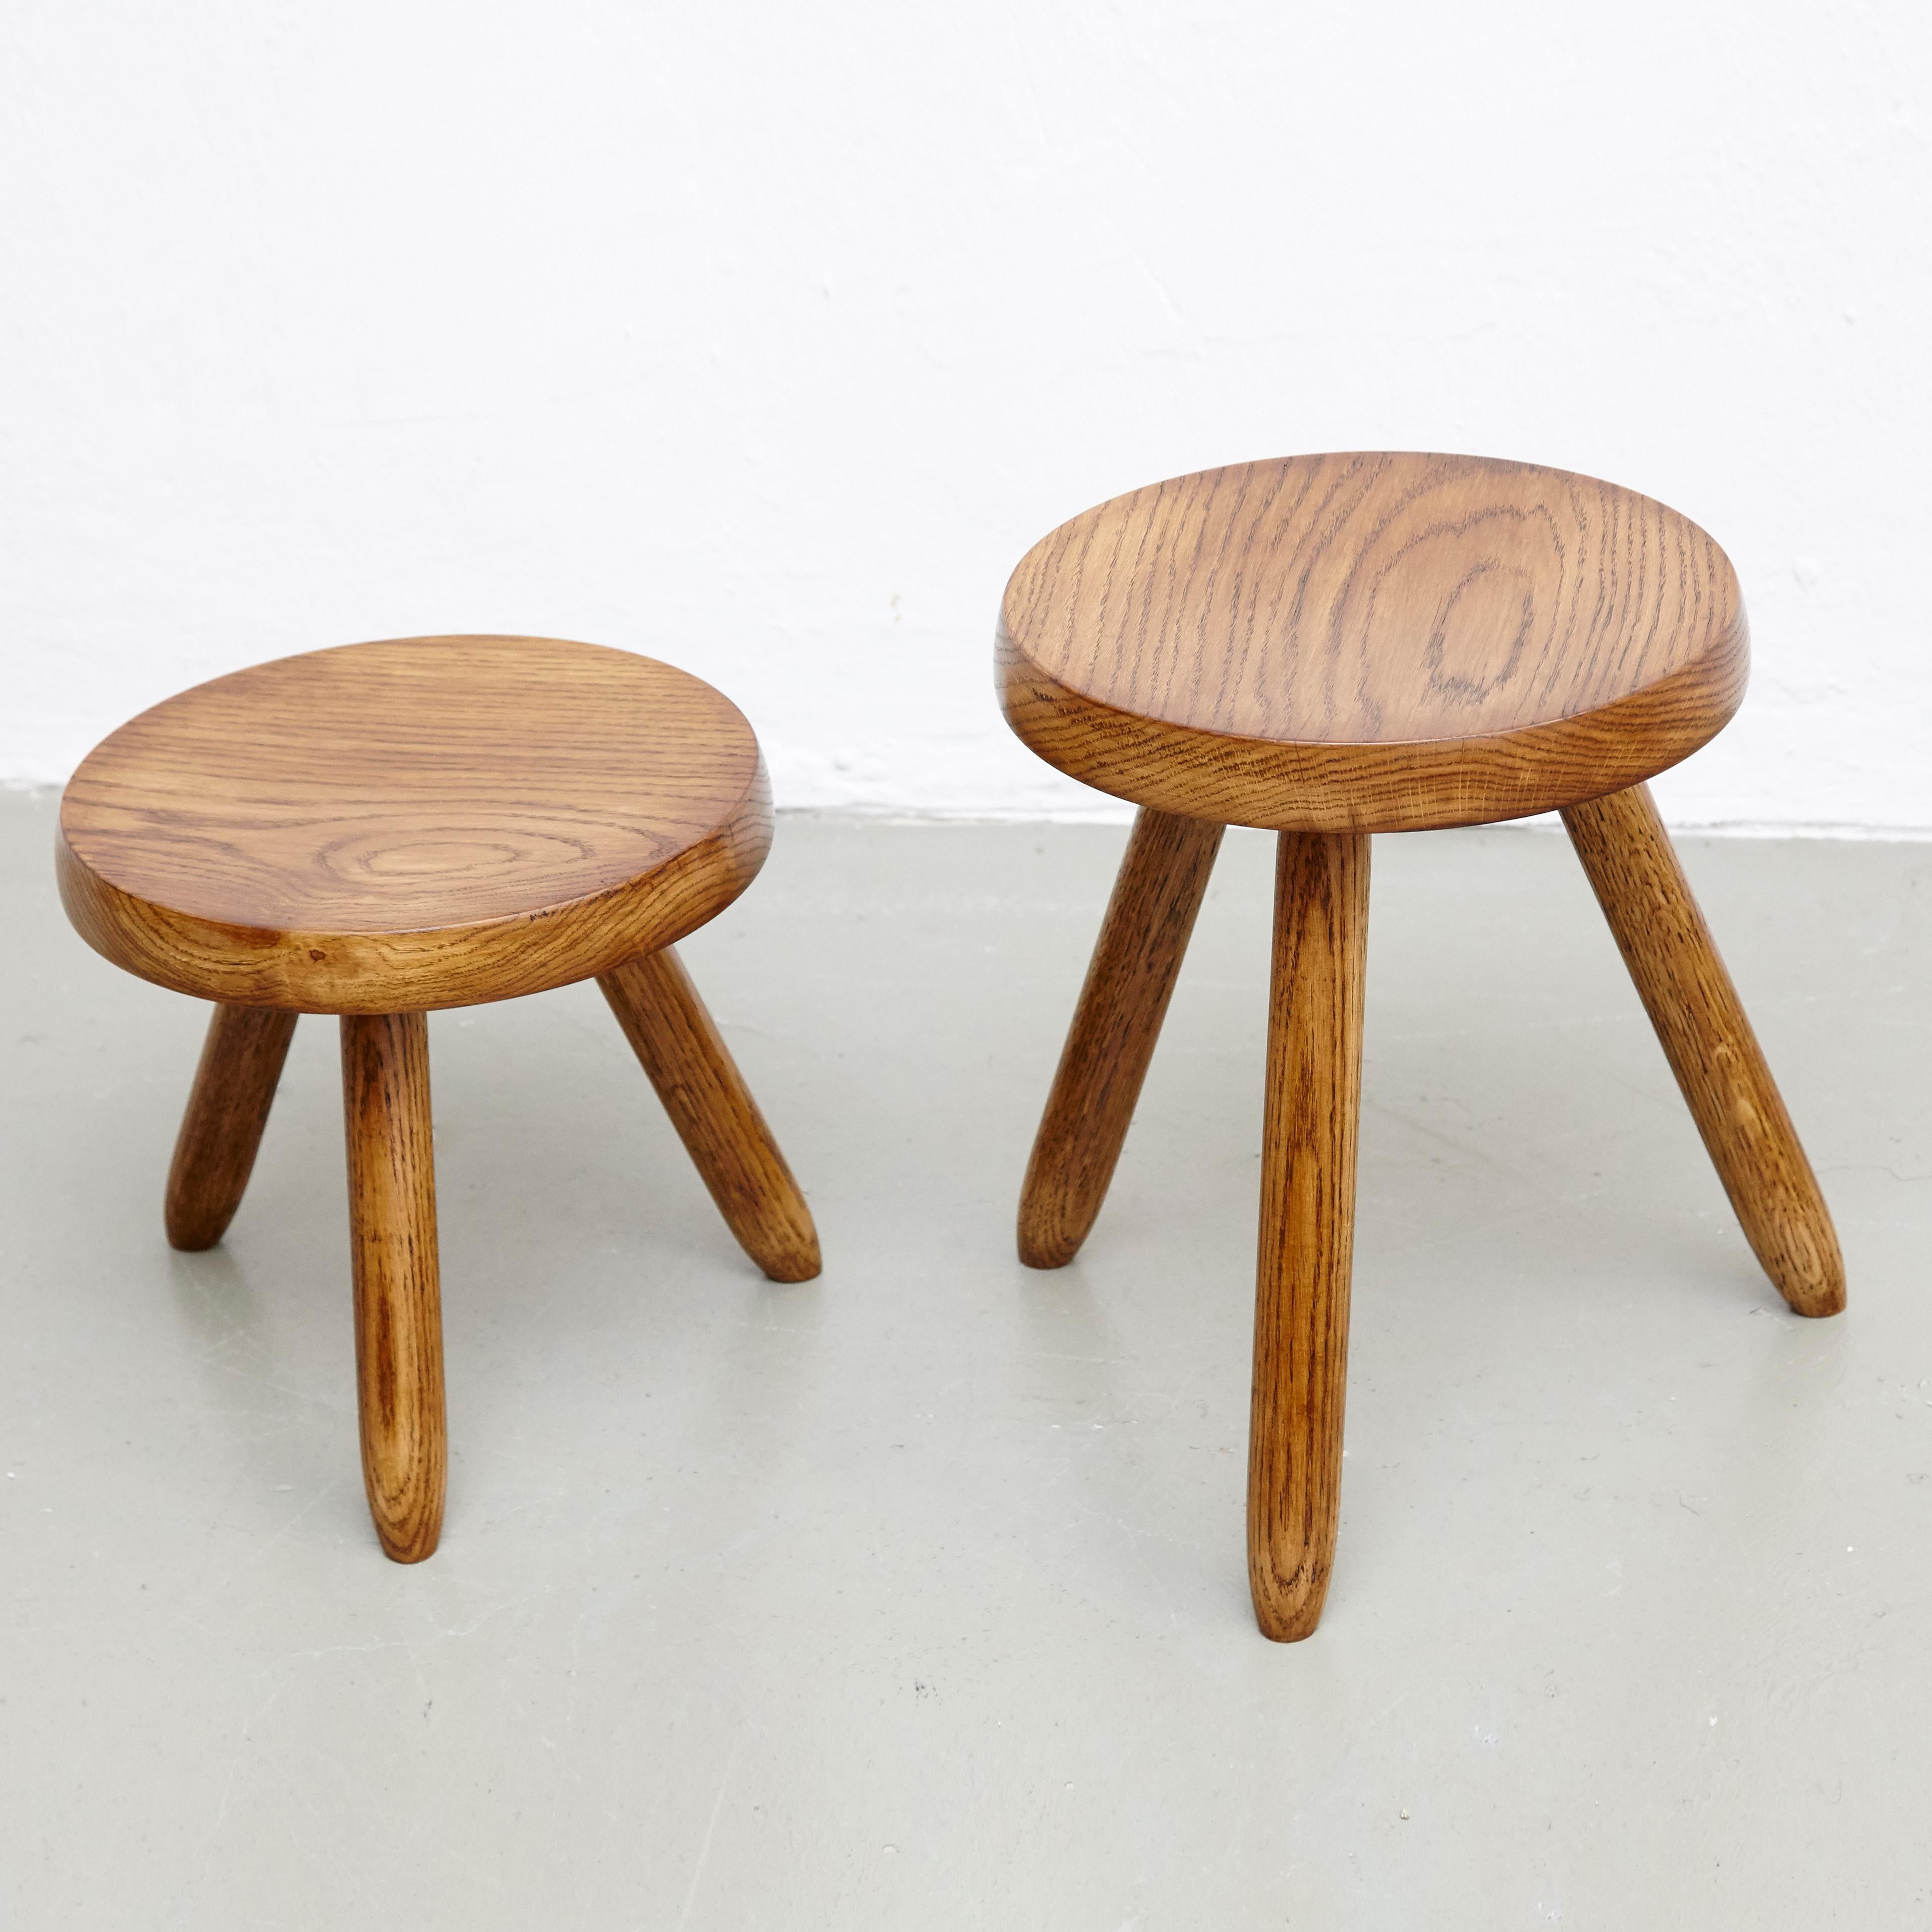 Mid-Century Modern Pair of Stools in the Style of Charlotte Perriand